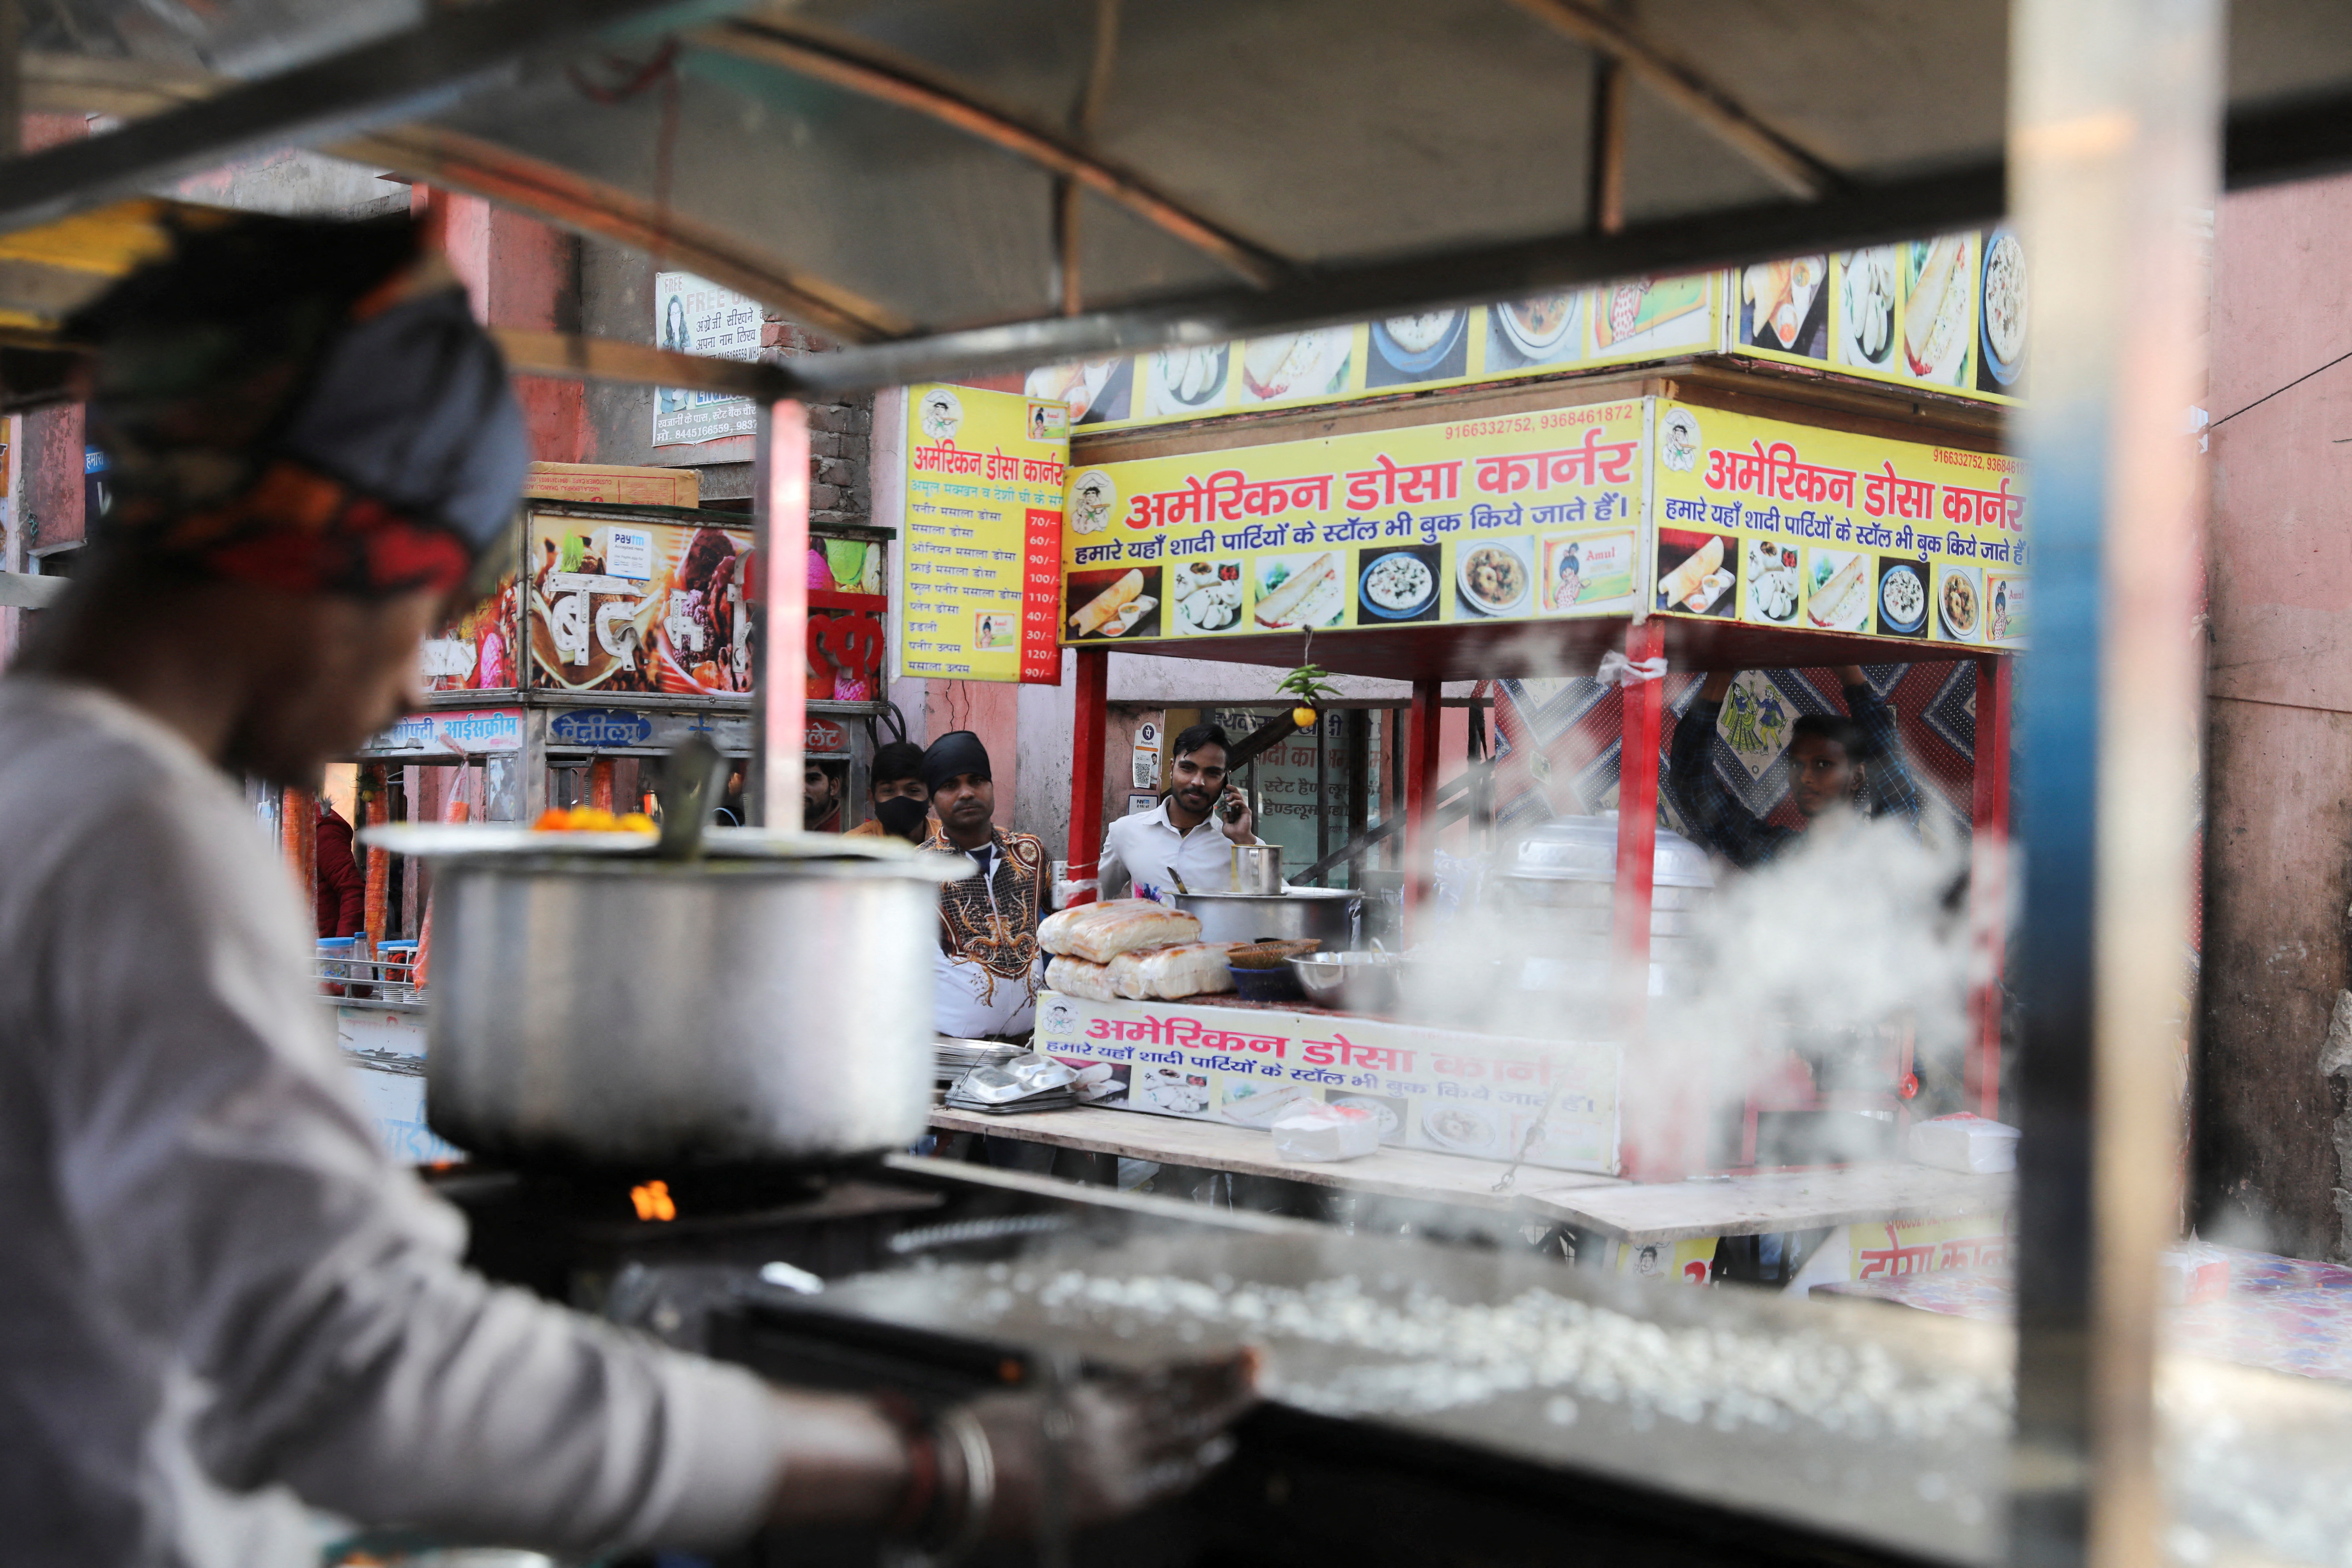 American Dosa Corner, a food cart, is pictured at a market in Mathura town